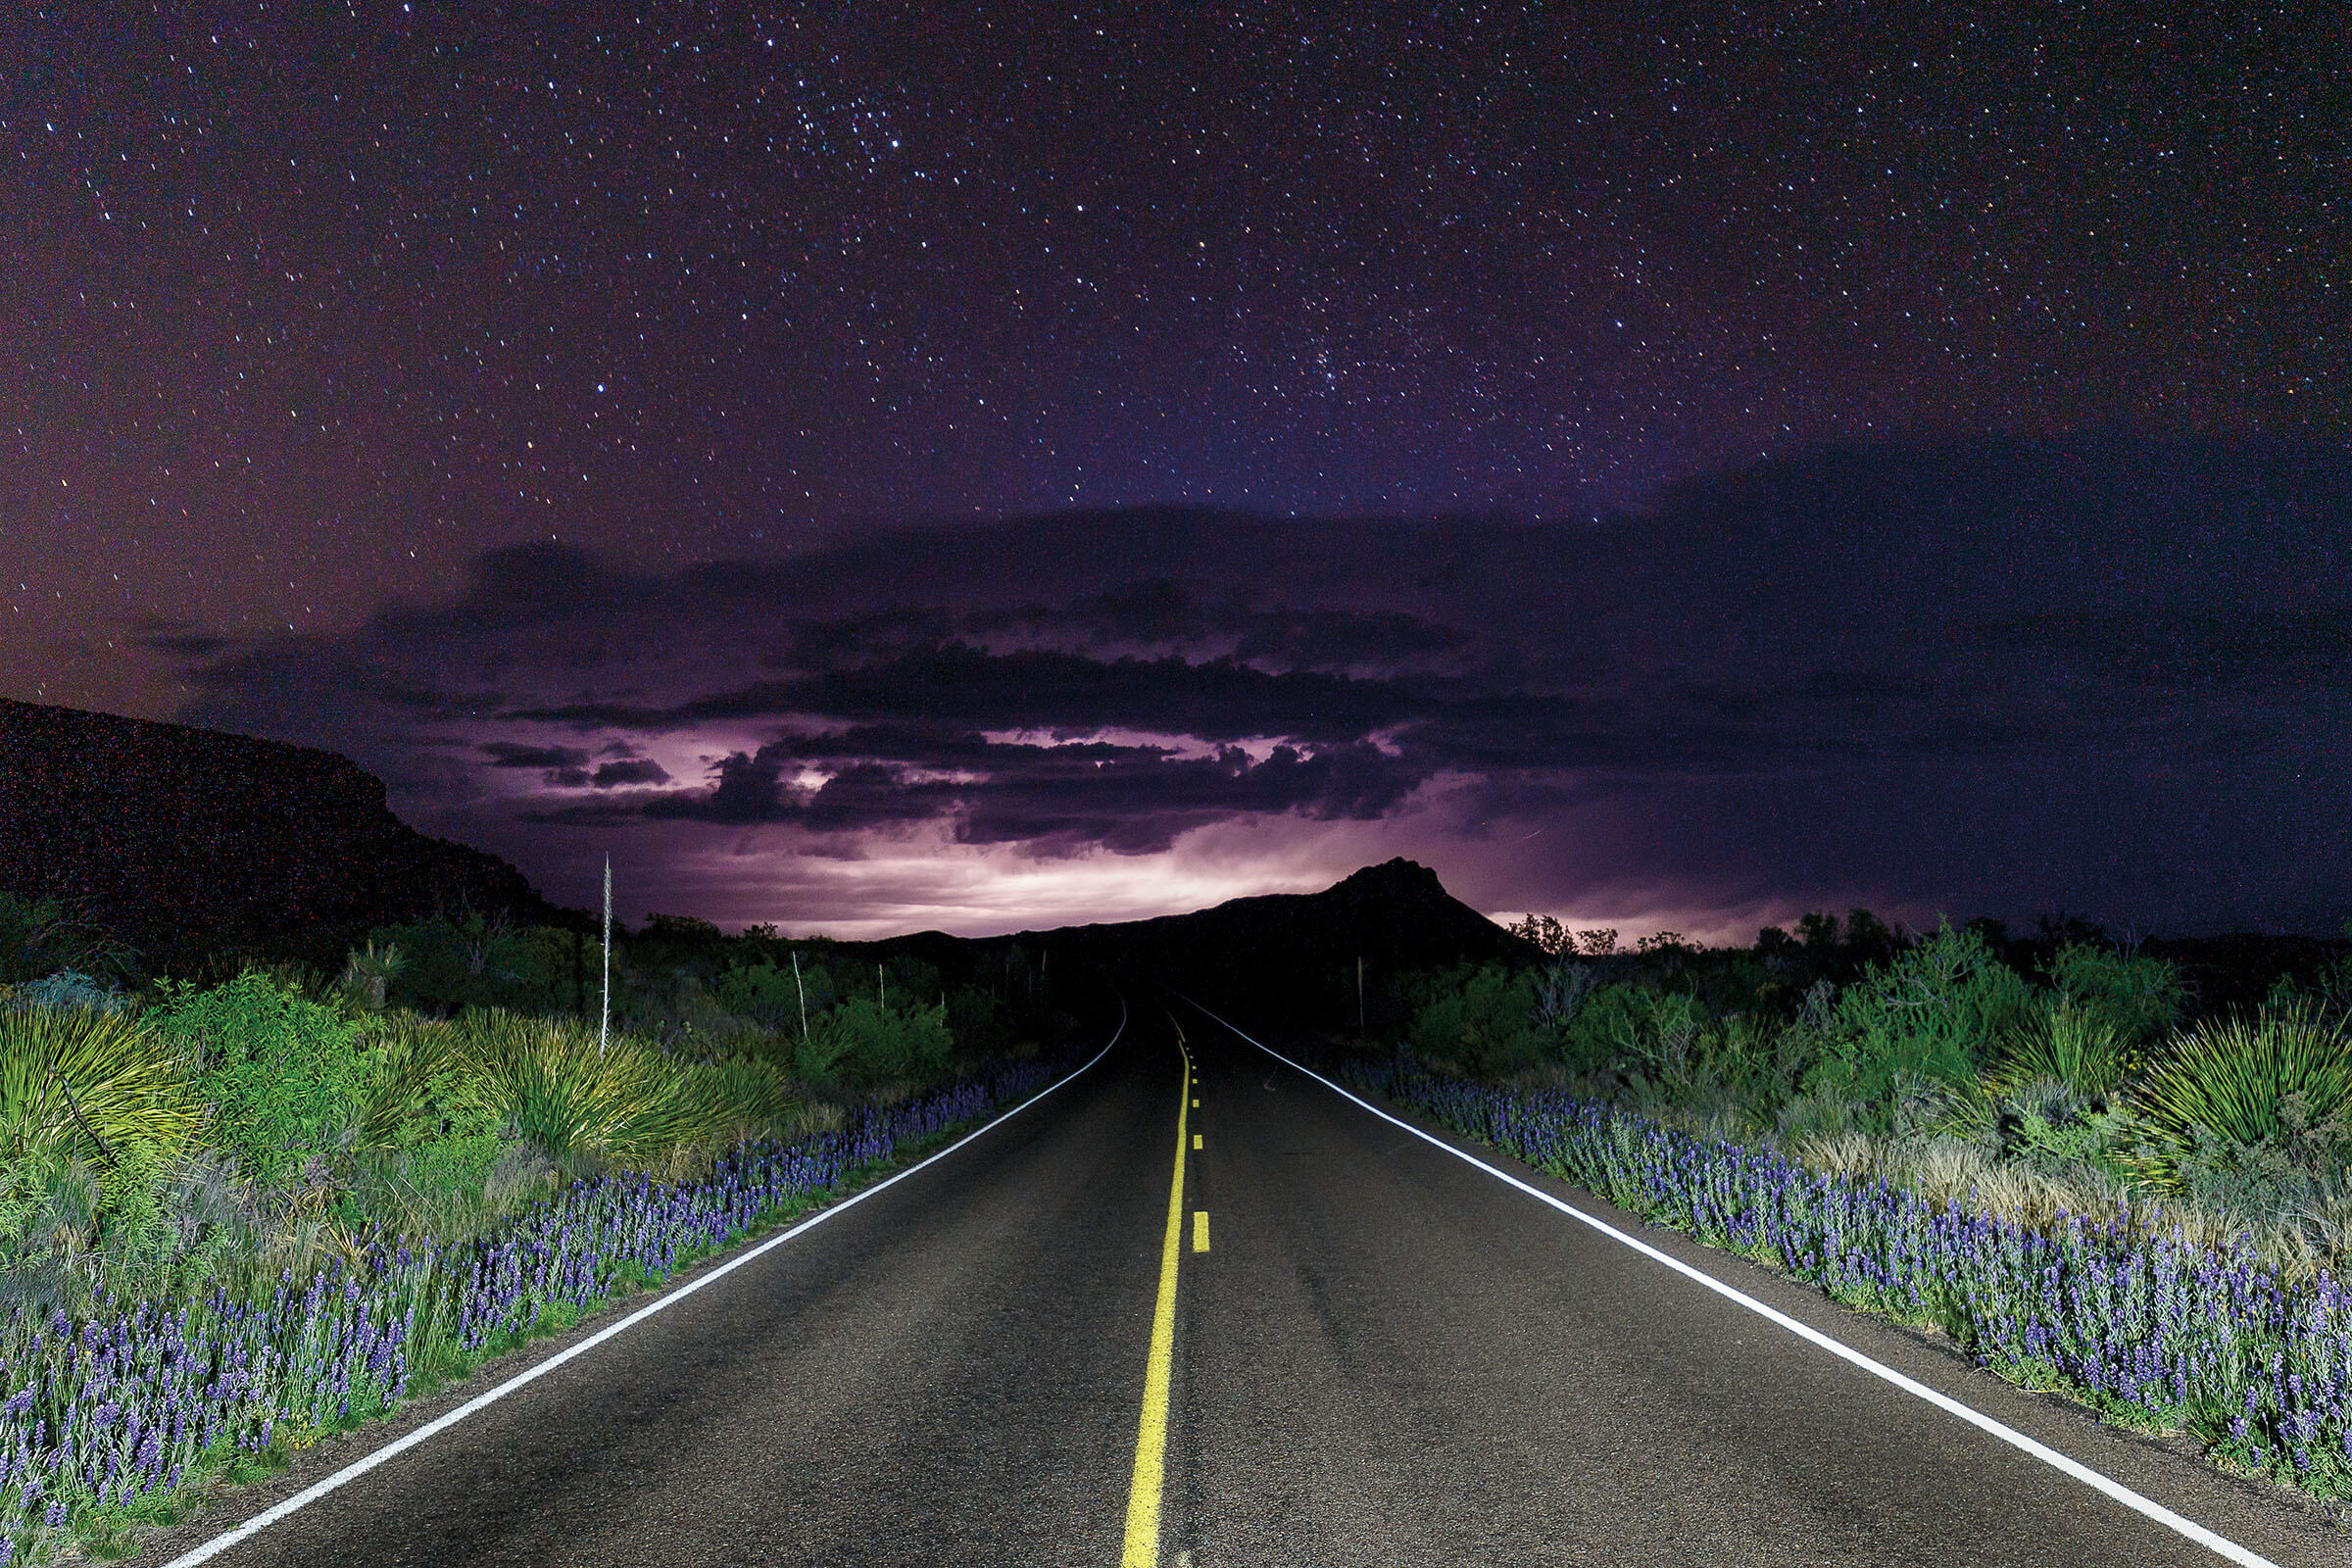 A lightning storm with dark purple clouds over a lonely highway